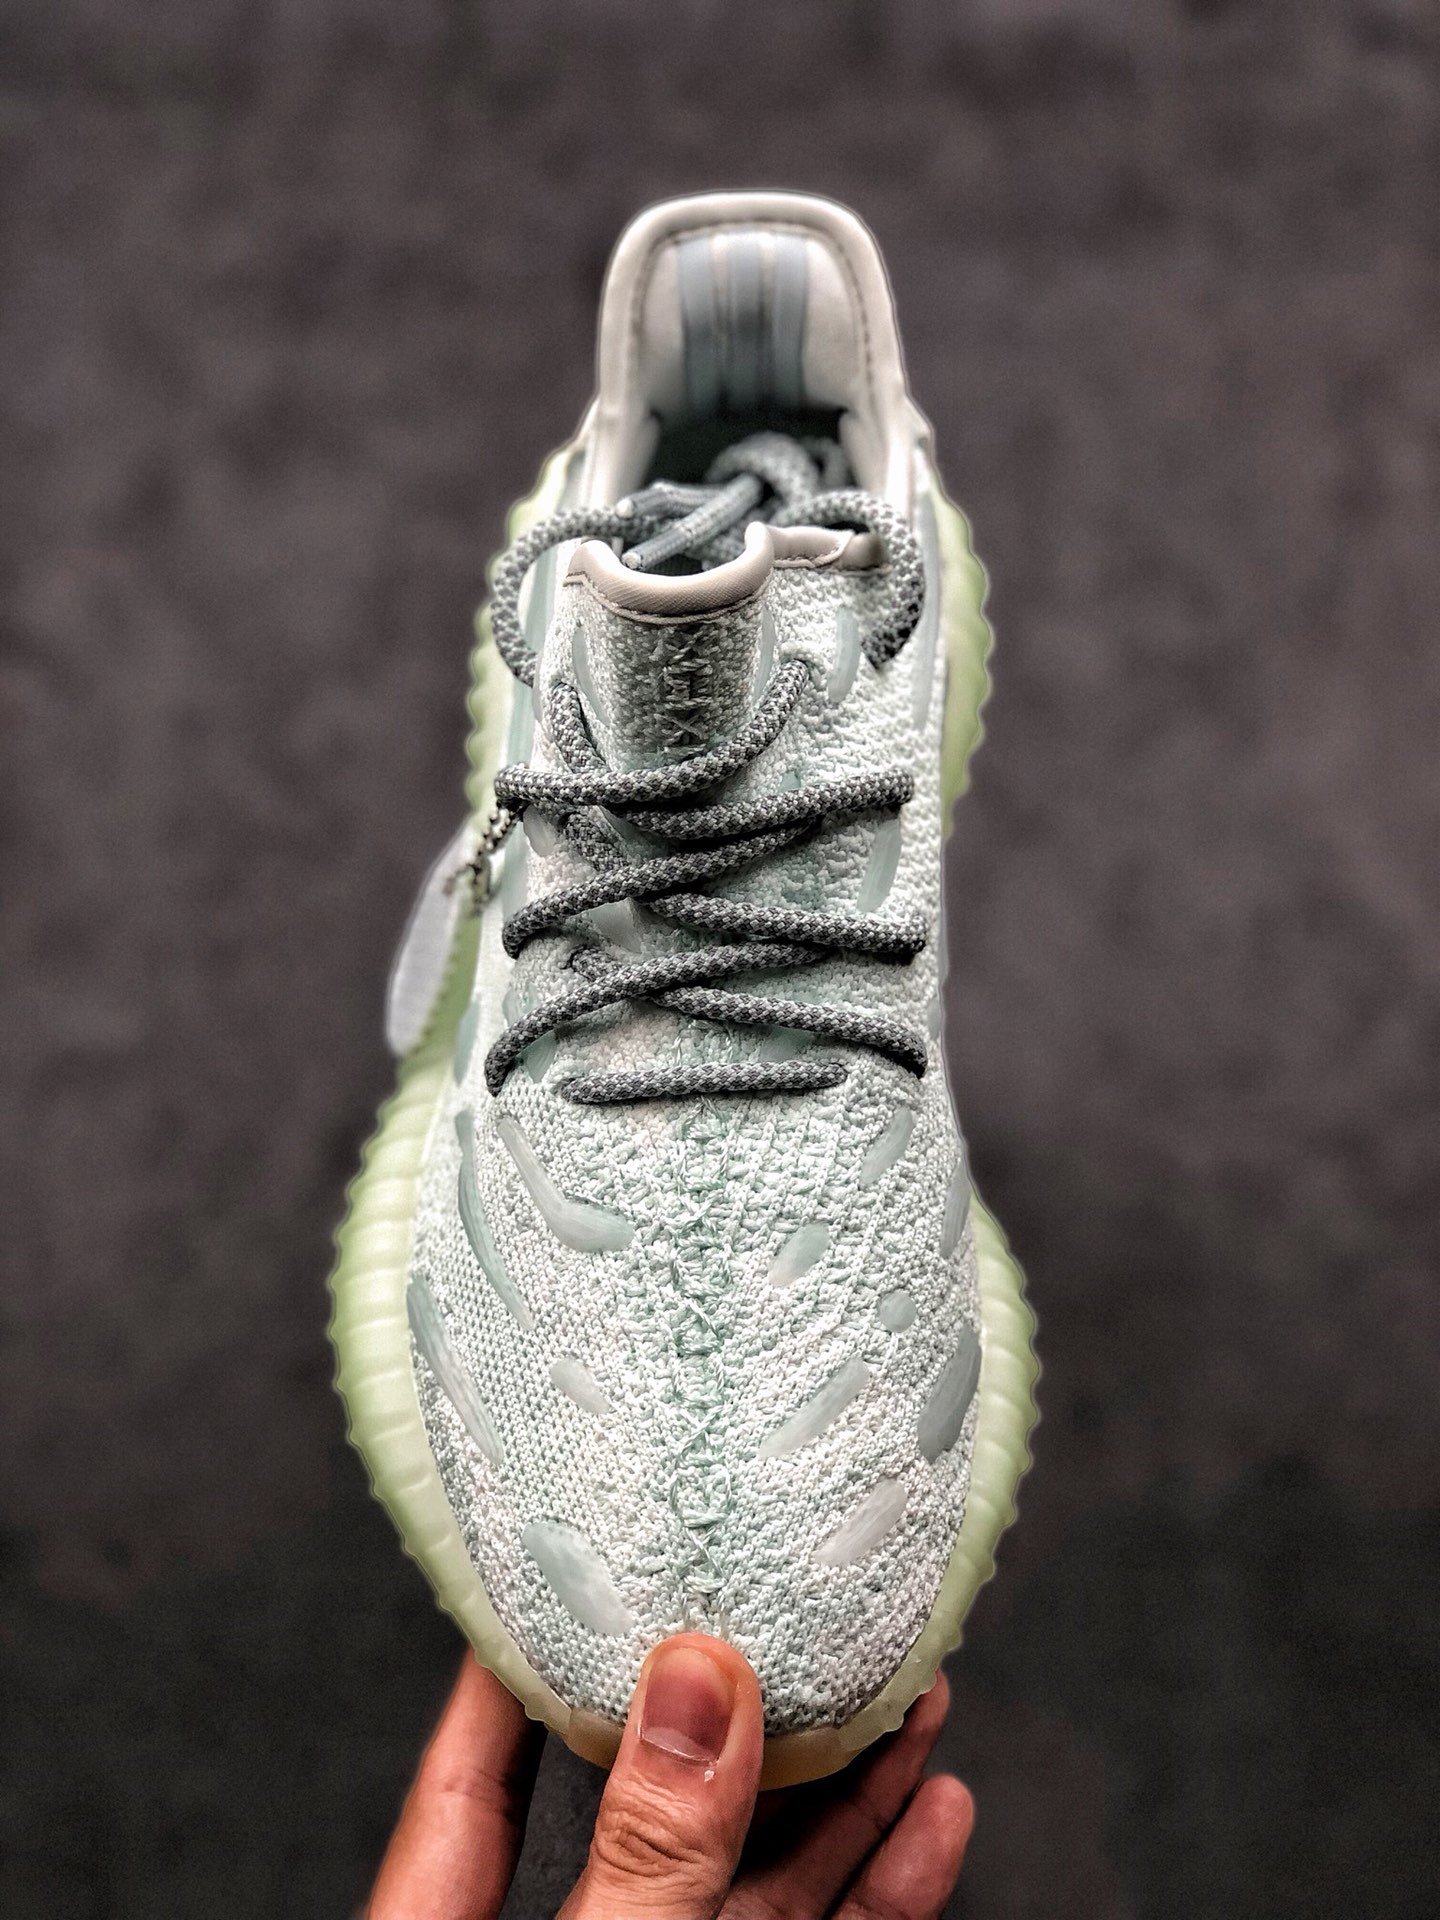 2020 cheap Adidas yeezy Boost 350 V2 Sneakers For Women # 225177, cheap Adidas Yeezy Shoes, only $99!